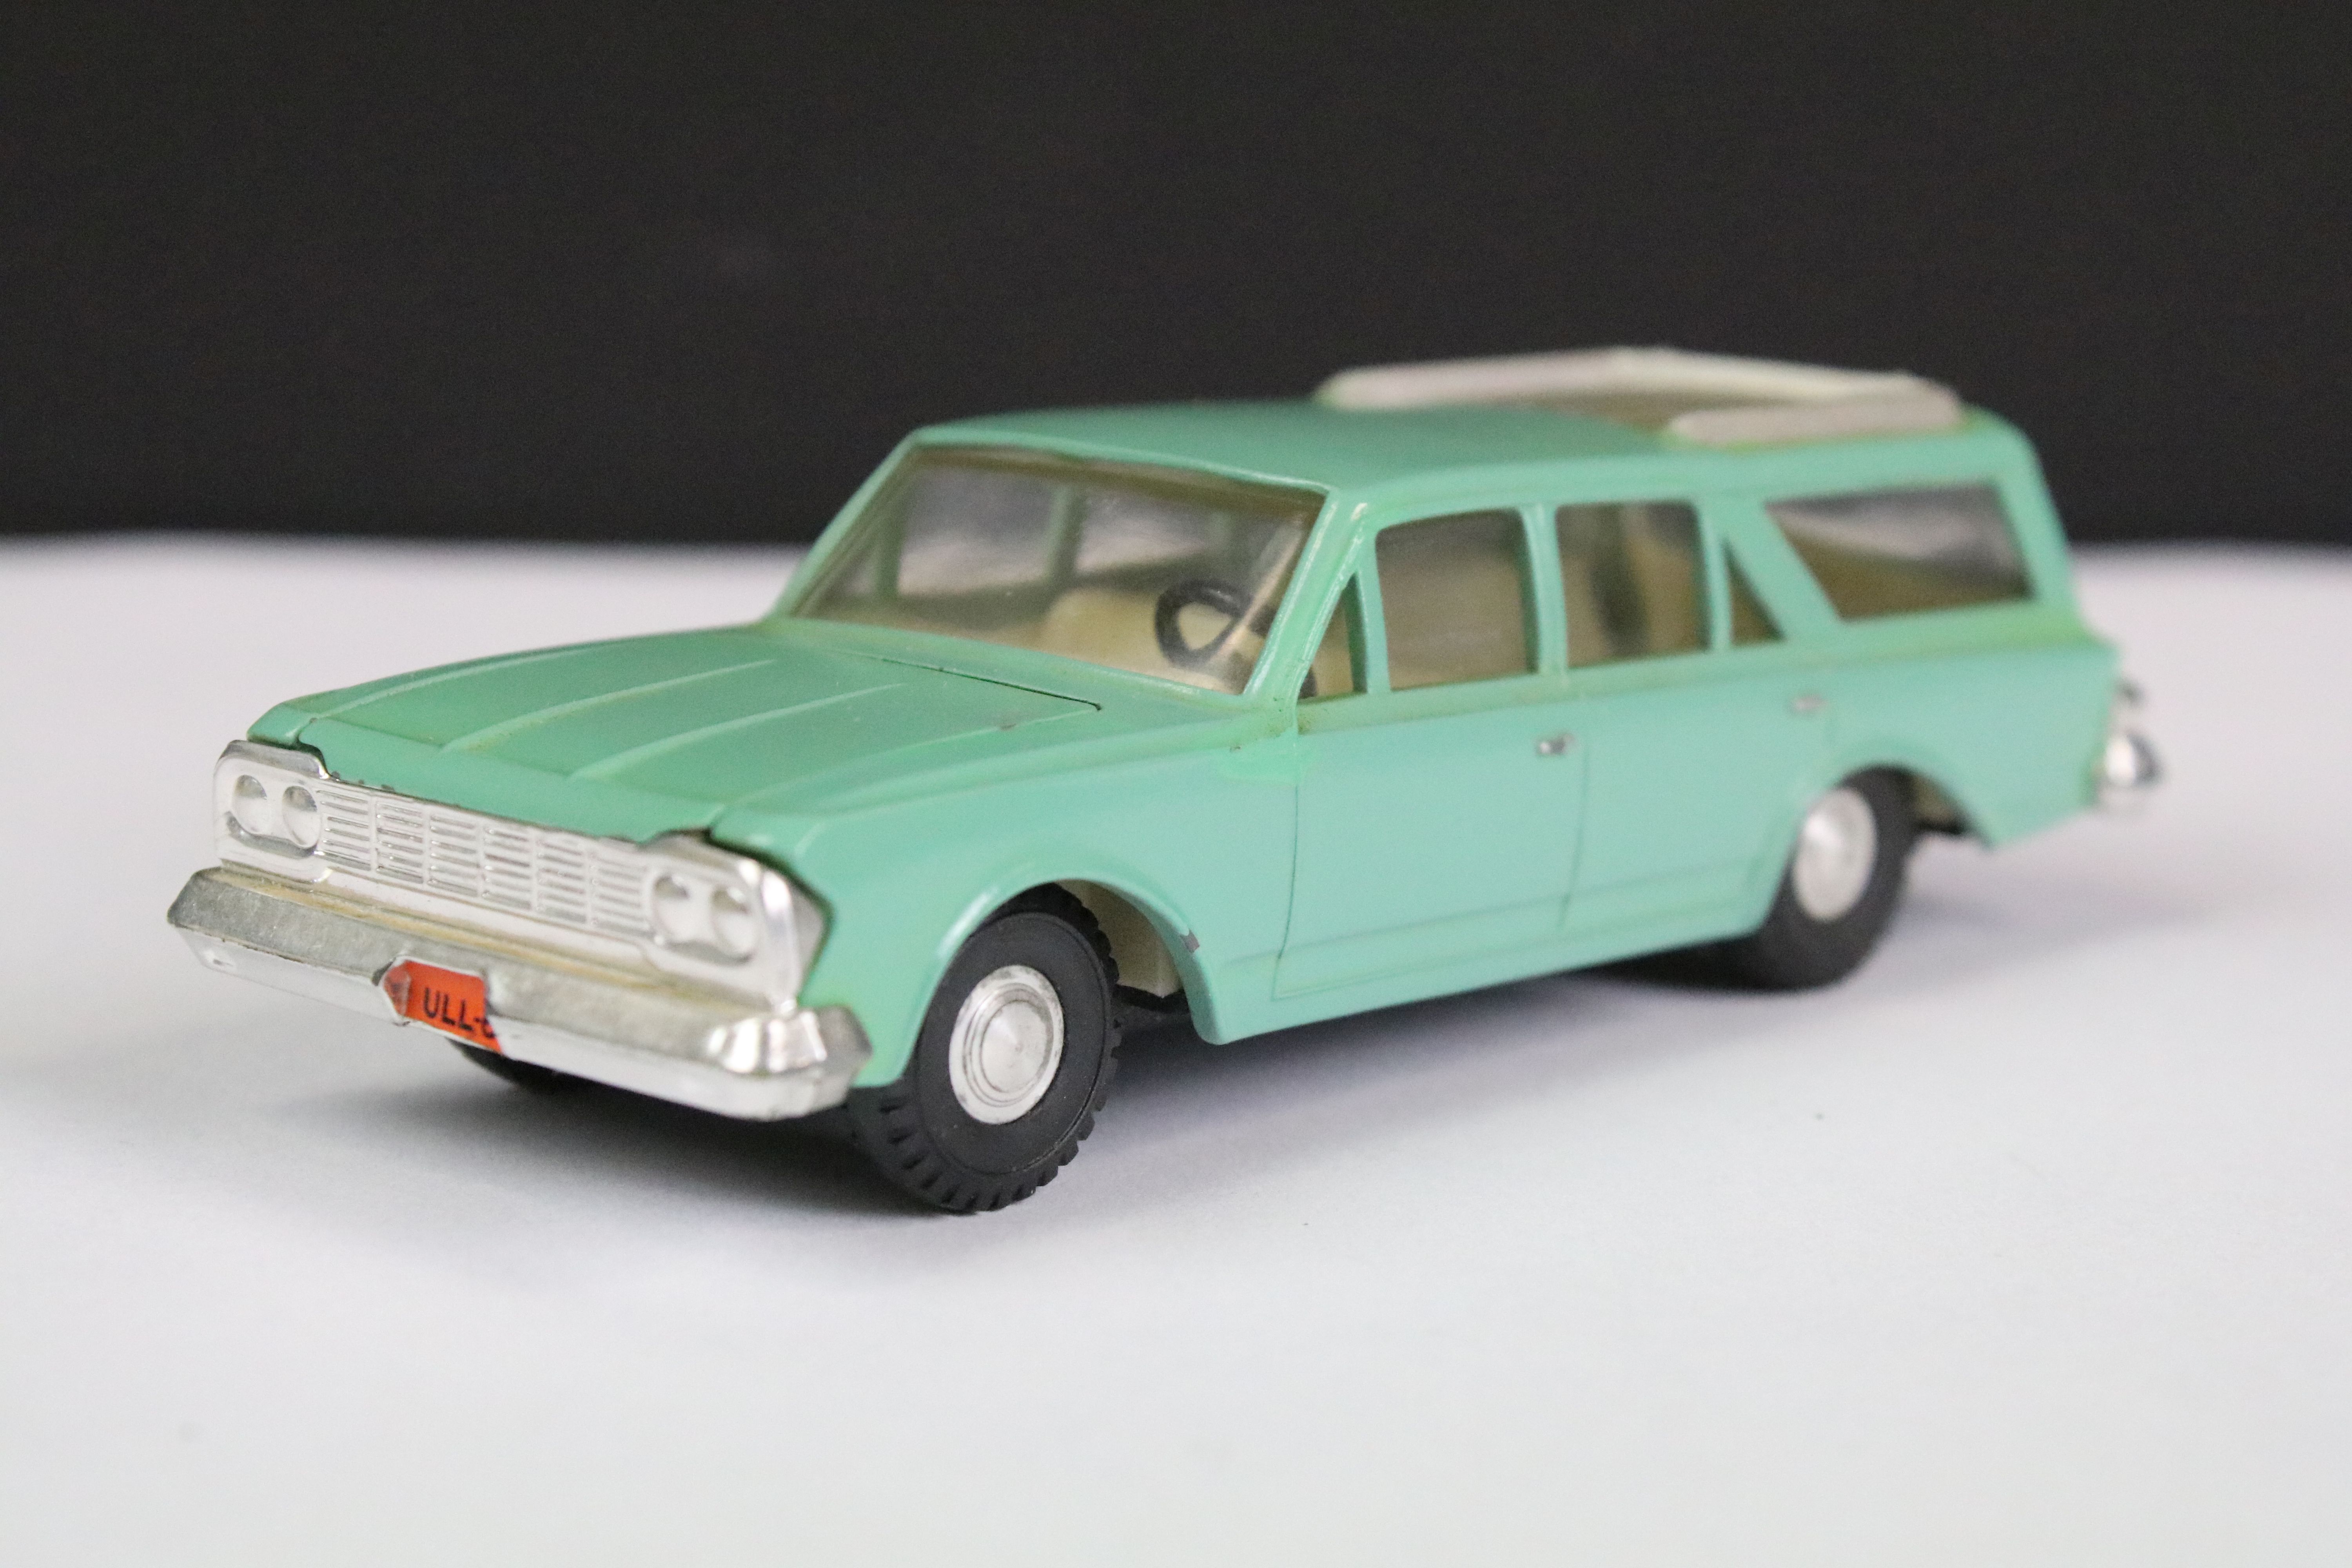 Boxed Hong Kong Dinky 57/006 Rambler Classic diecast model in pale green with silver roof and - Image 2 of 5